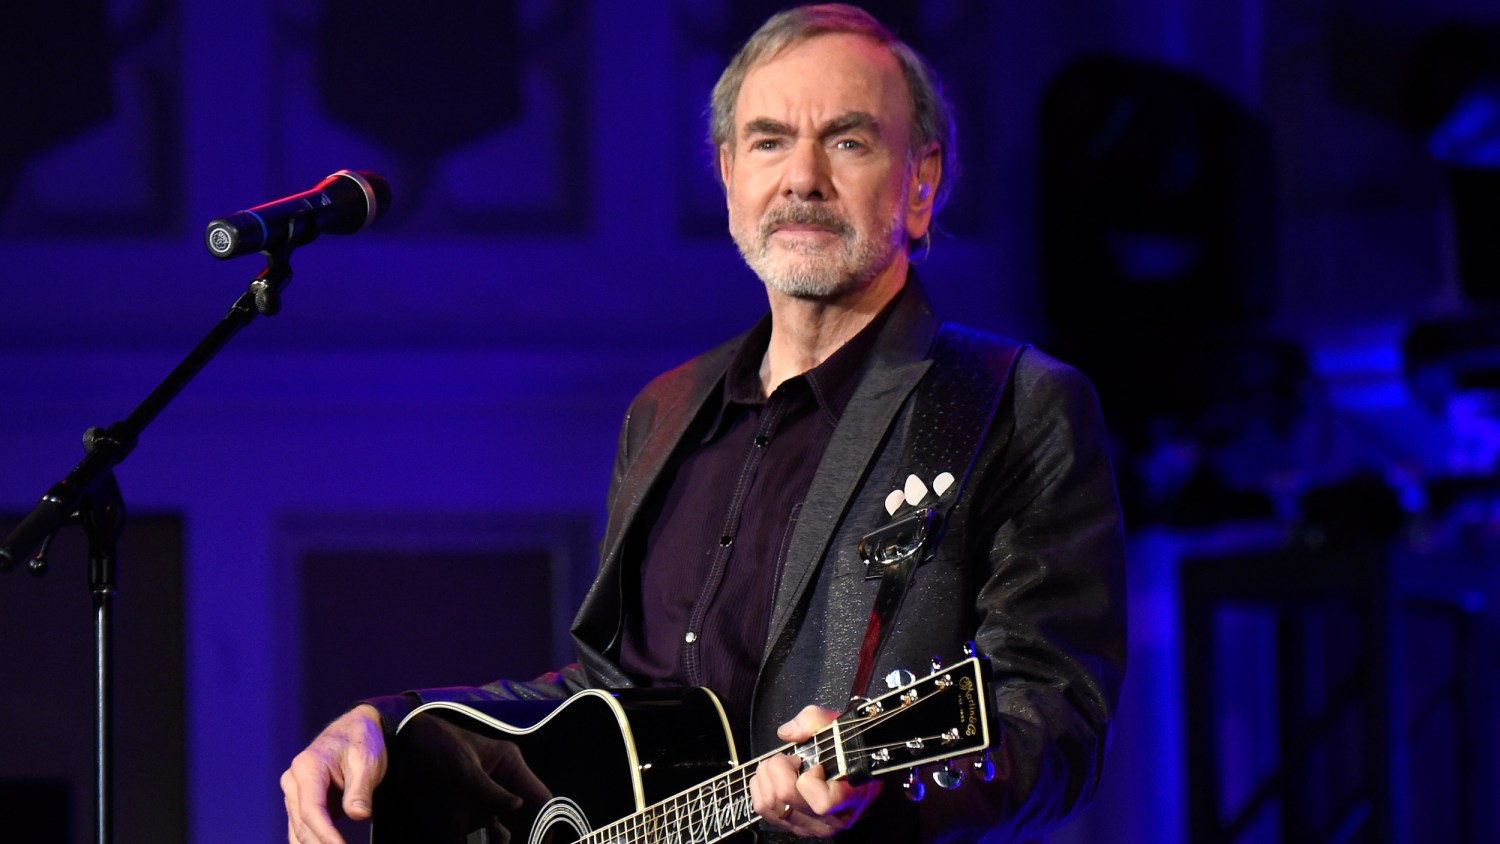 Neil Diamond retires from touring after Parkinson's disease diagnosis